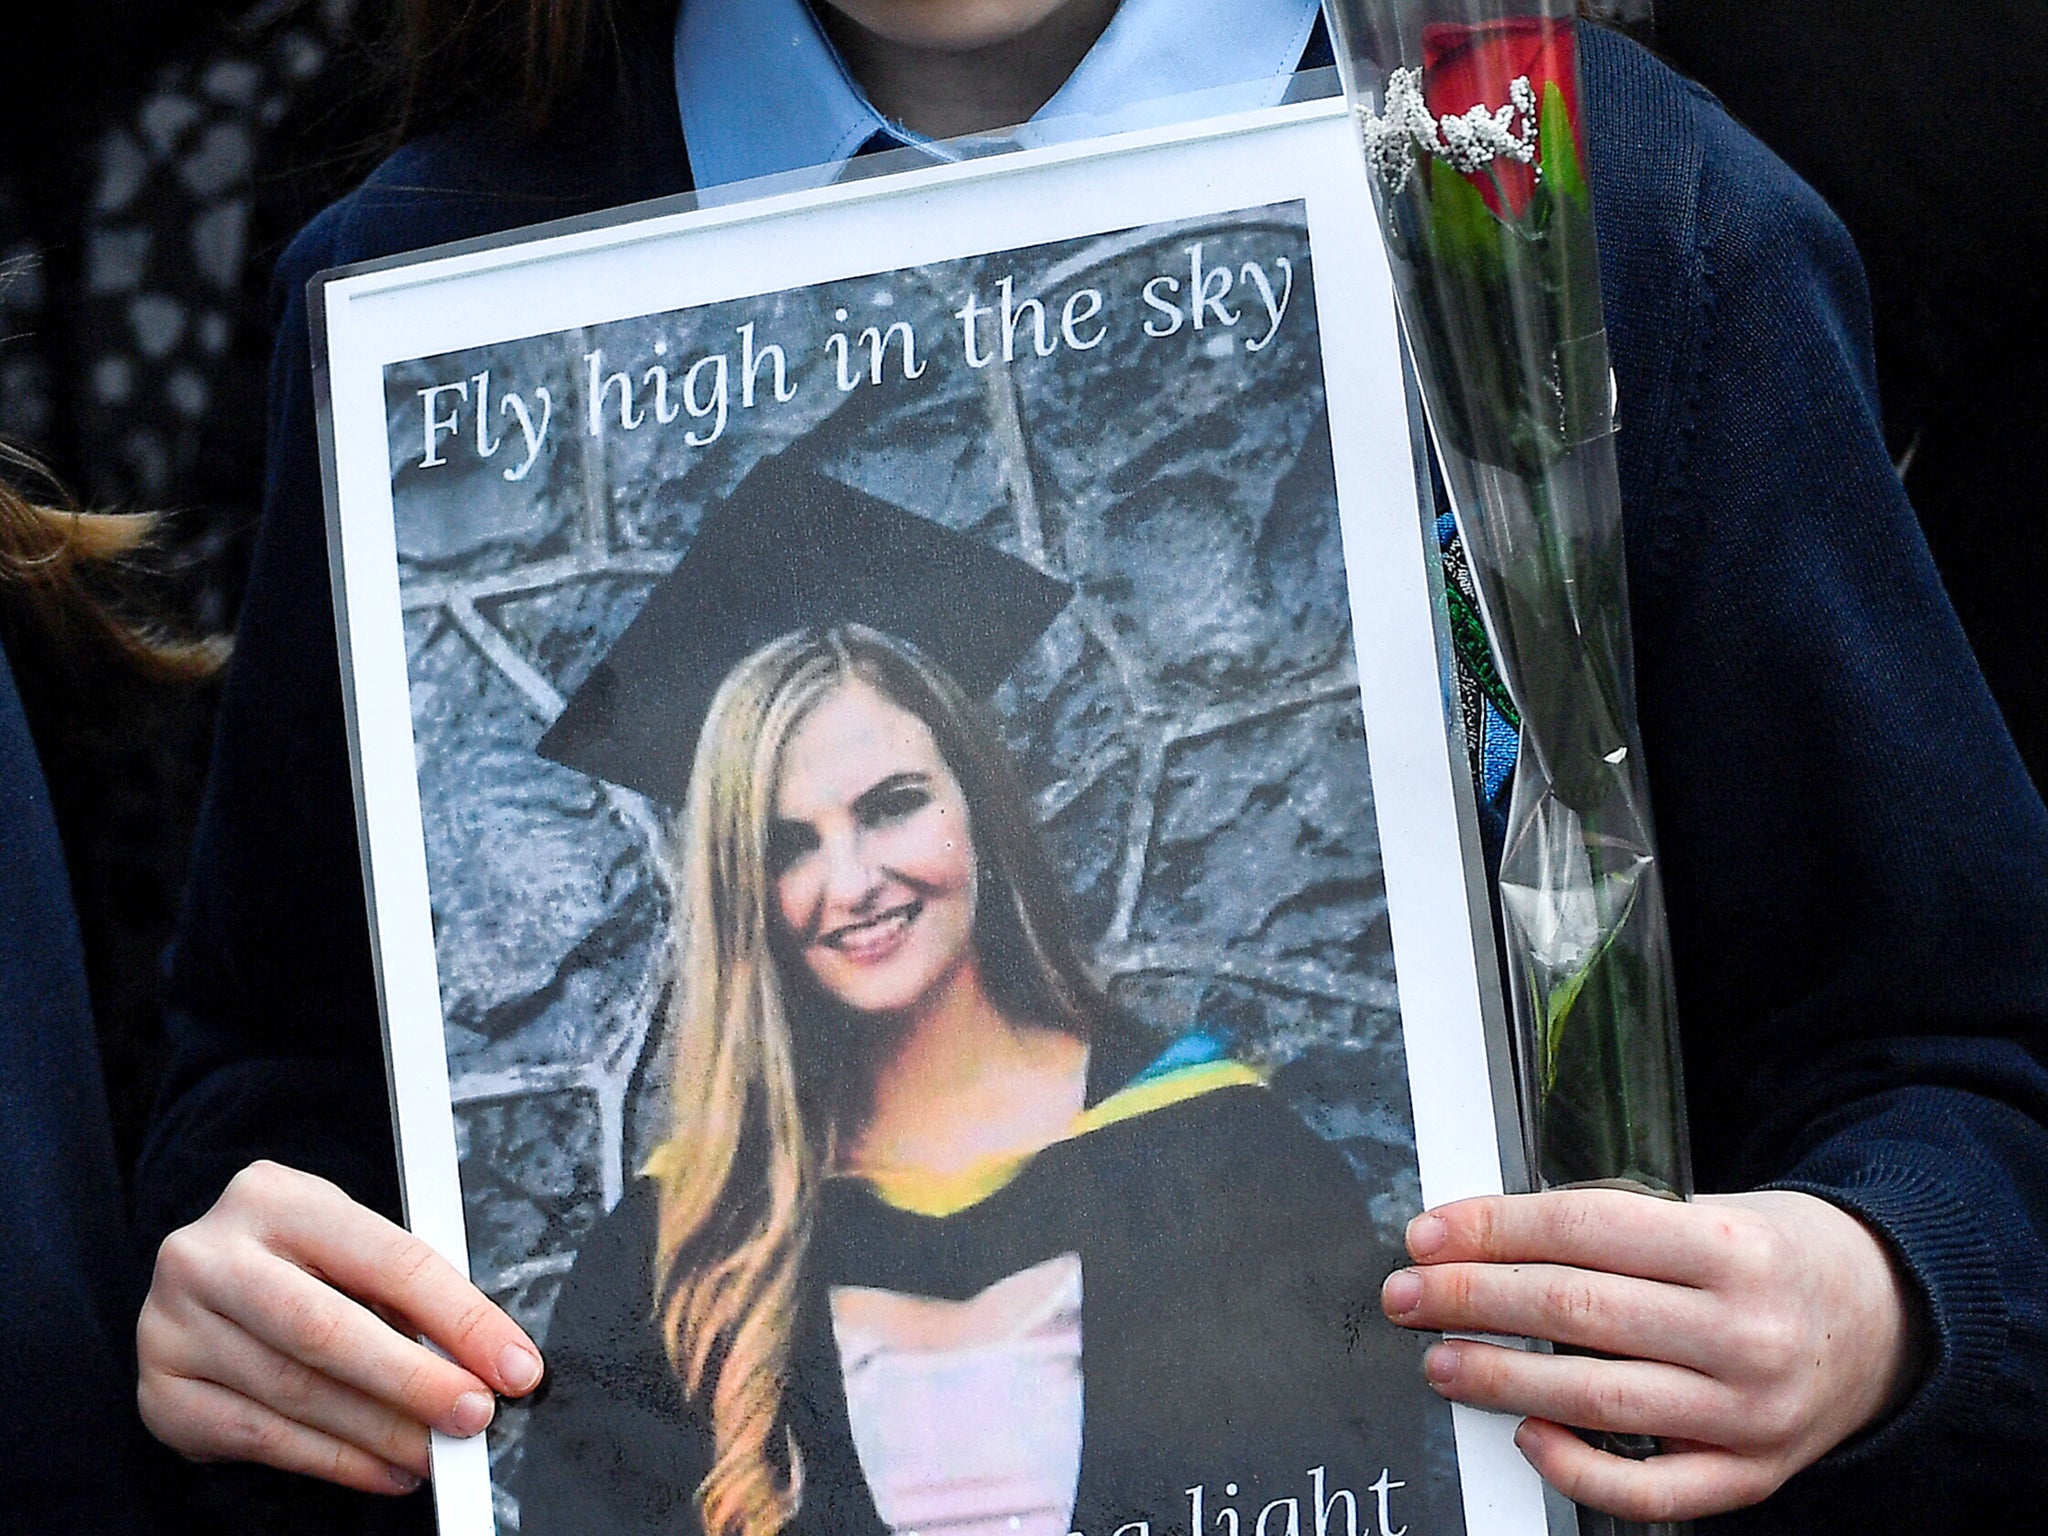 A pupil from Ashling Murphy’s class holds a photograph of her and a red rose ahead of her funeral in County Offaly